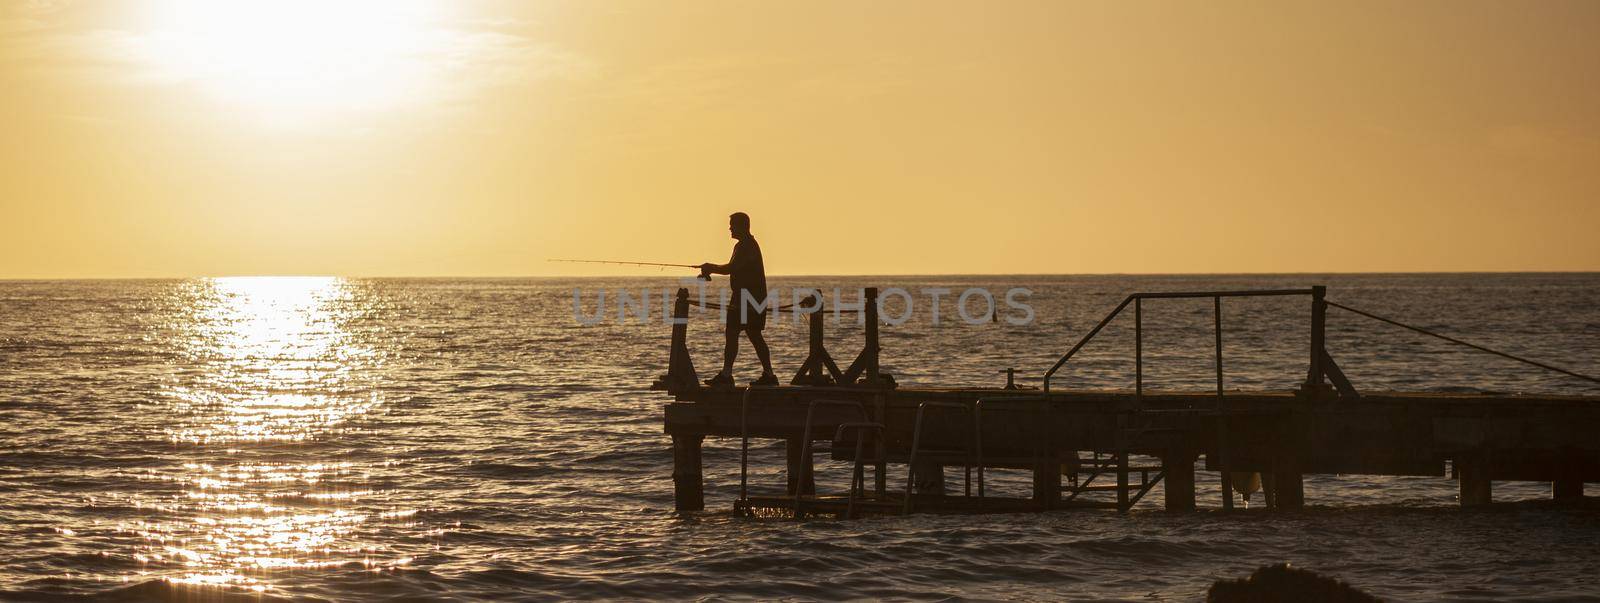 Fisherman on the pier at sunset, banner image with copy space